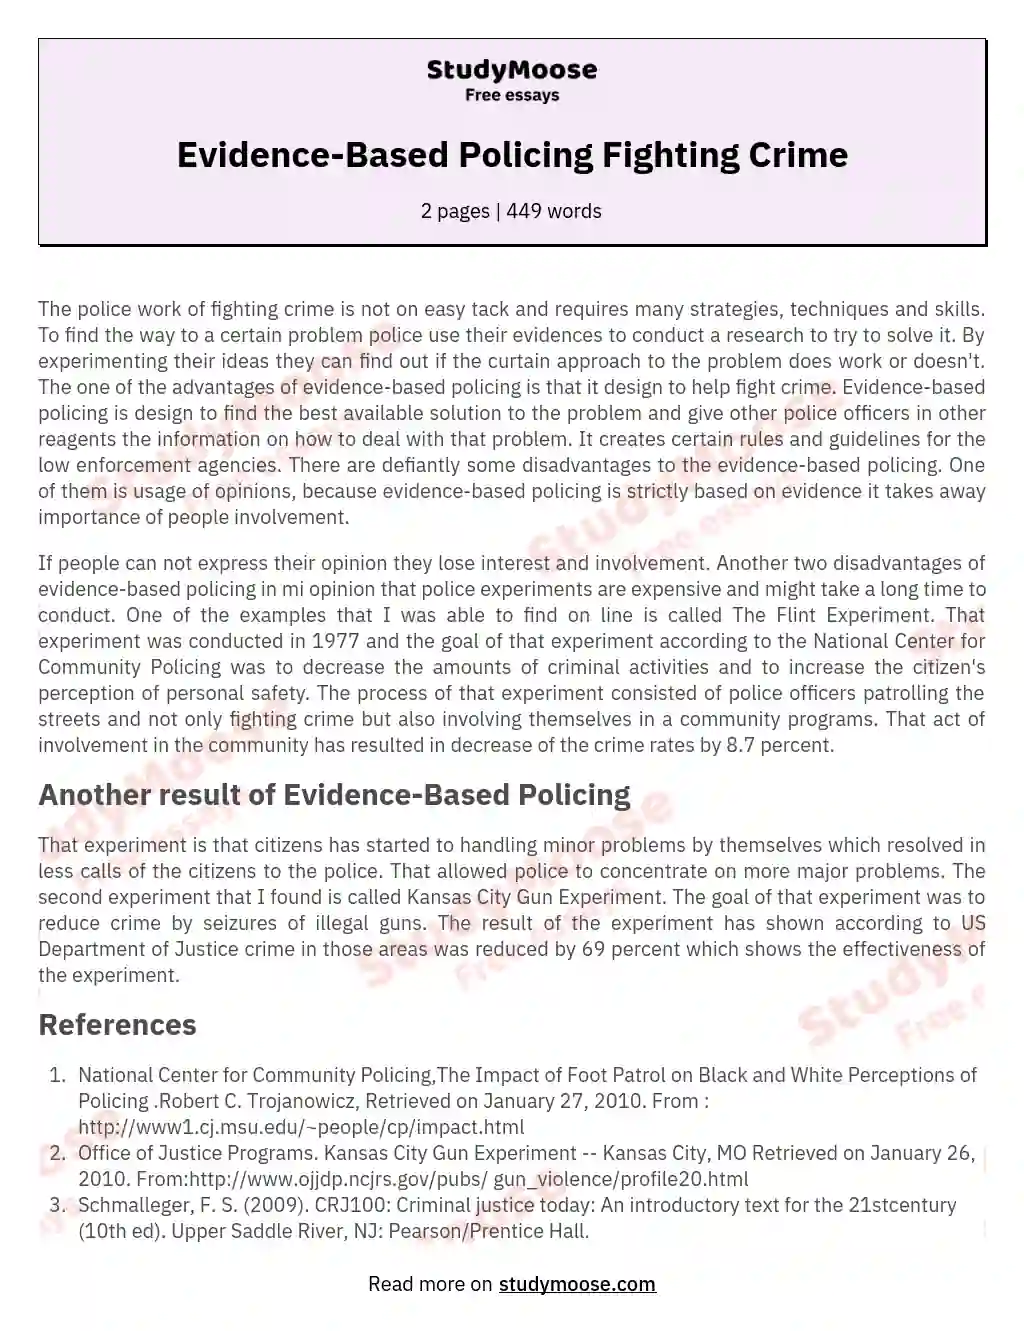 Evidence-Based Policing Fighting Crime